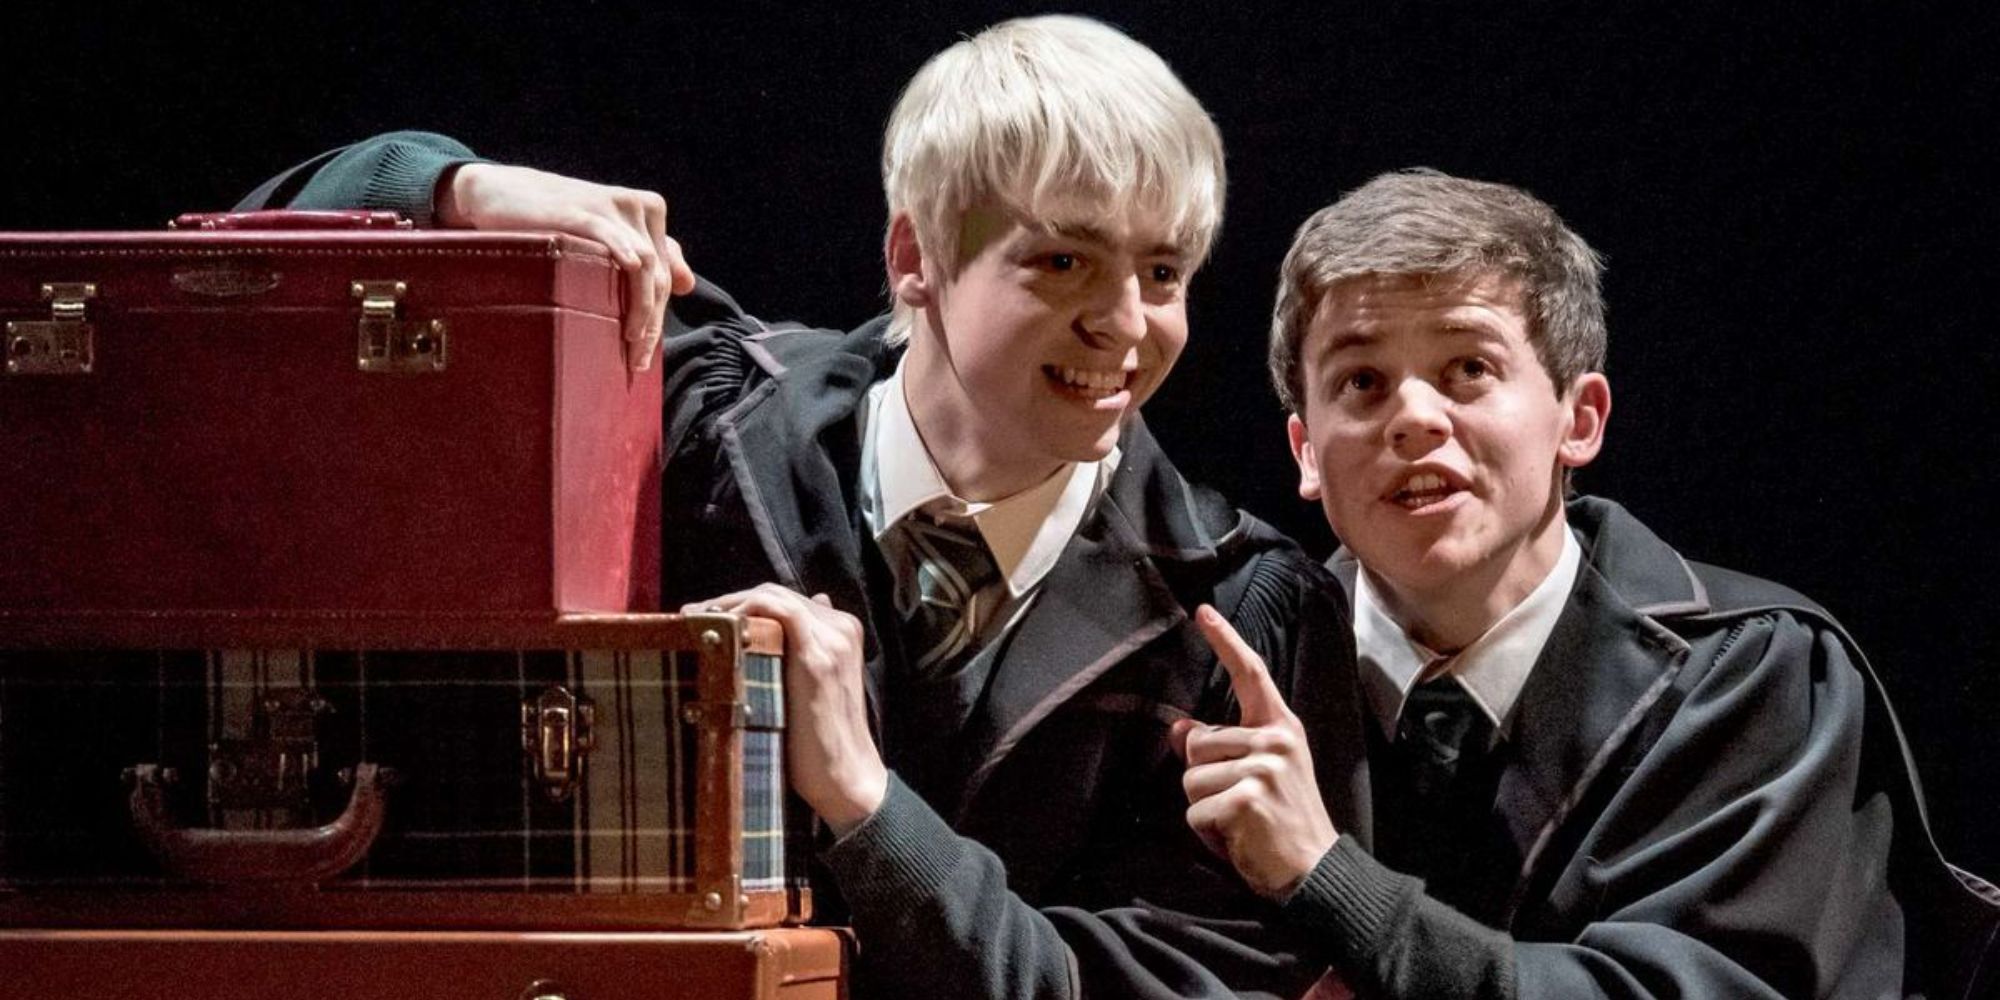 Albus Potter and Scorpius Malfoy (Anthony Boyle) crouch by some luggage in The Cursed Child.